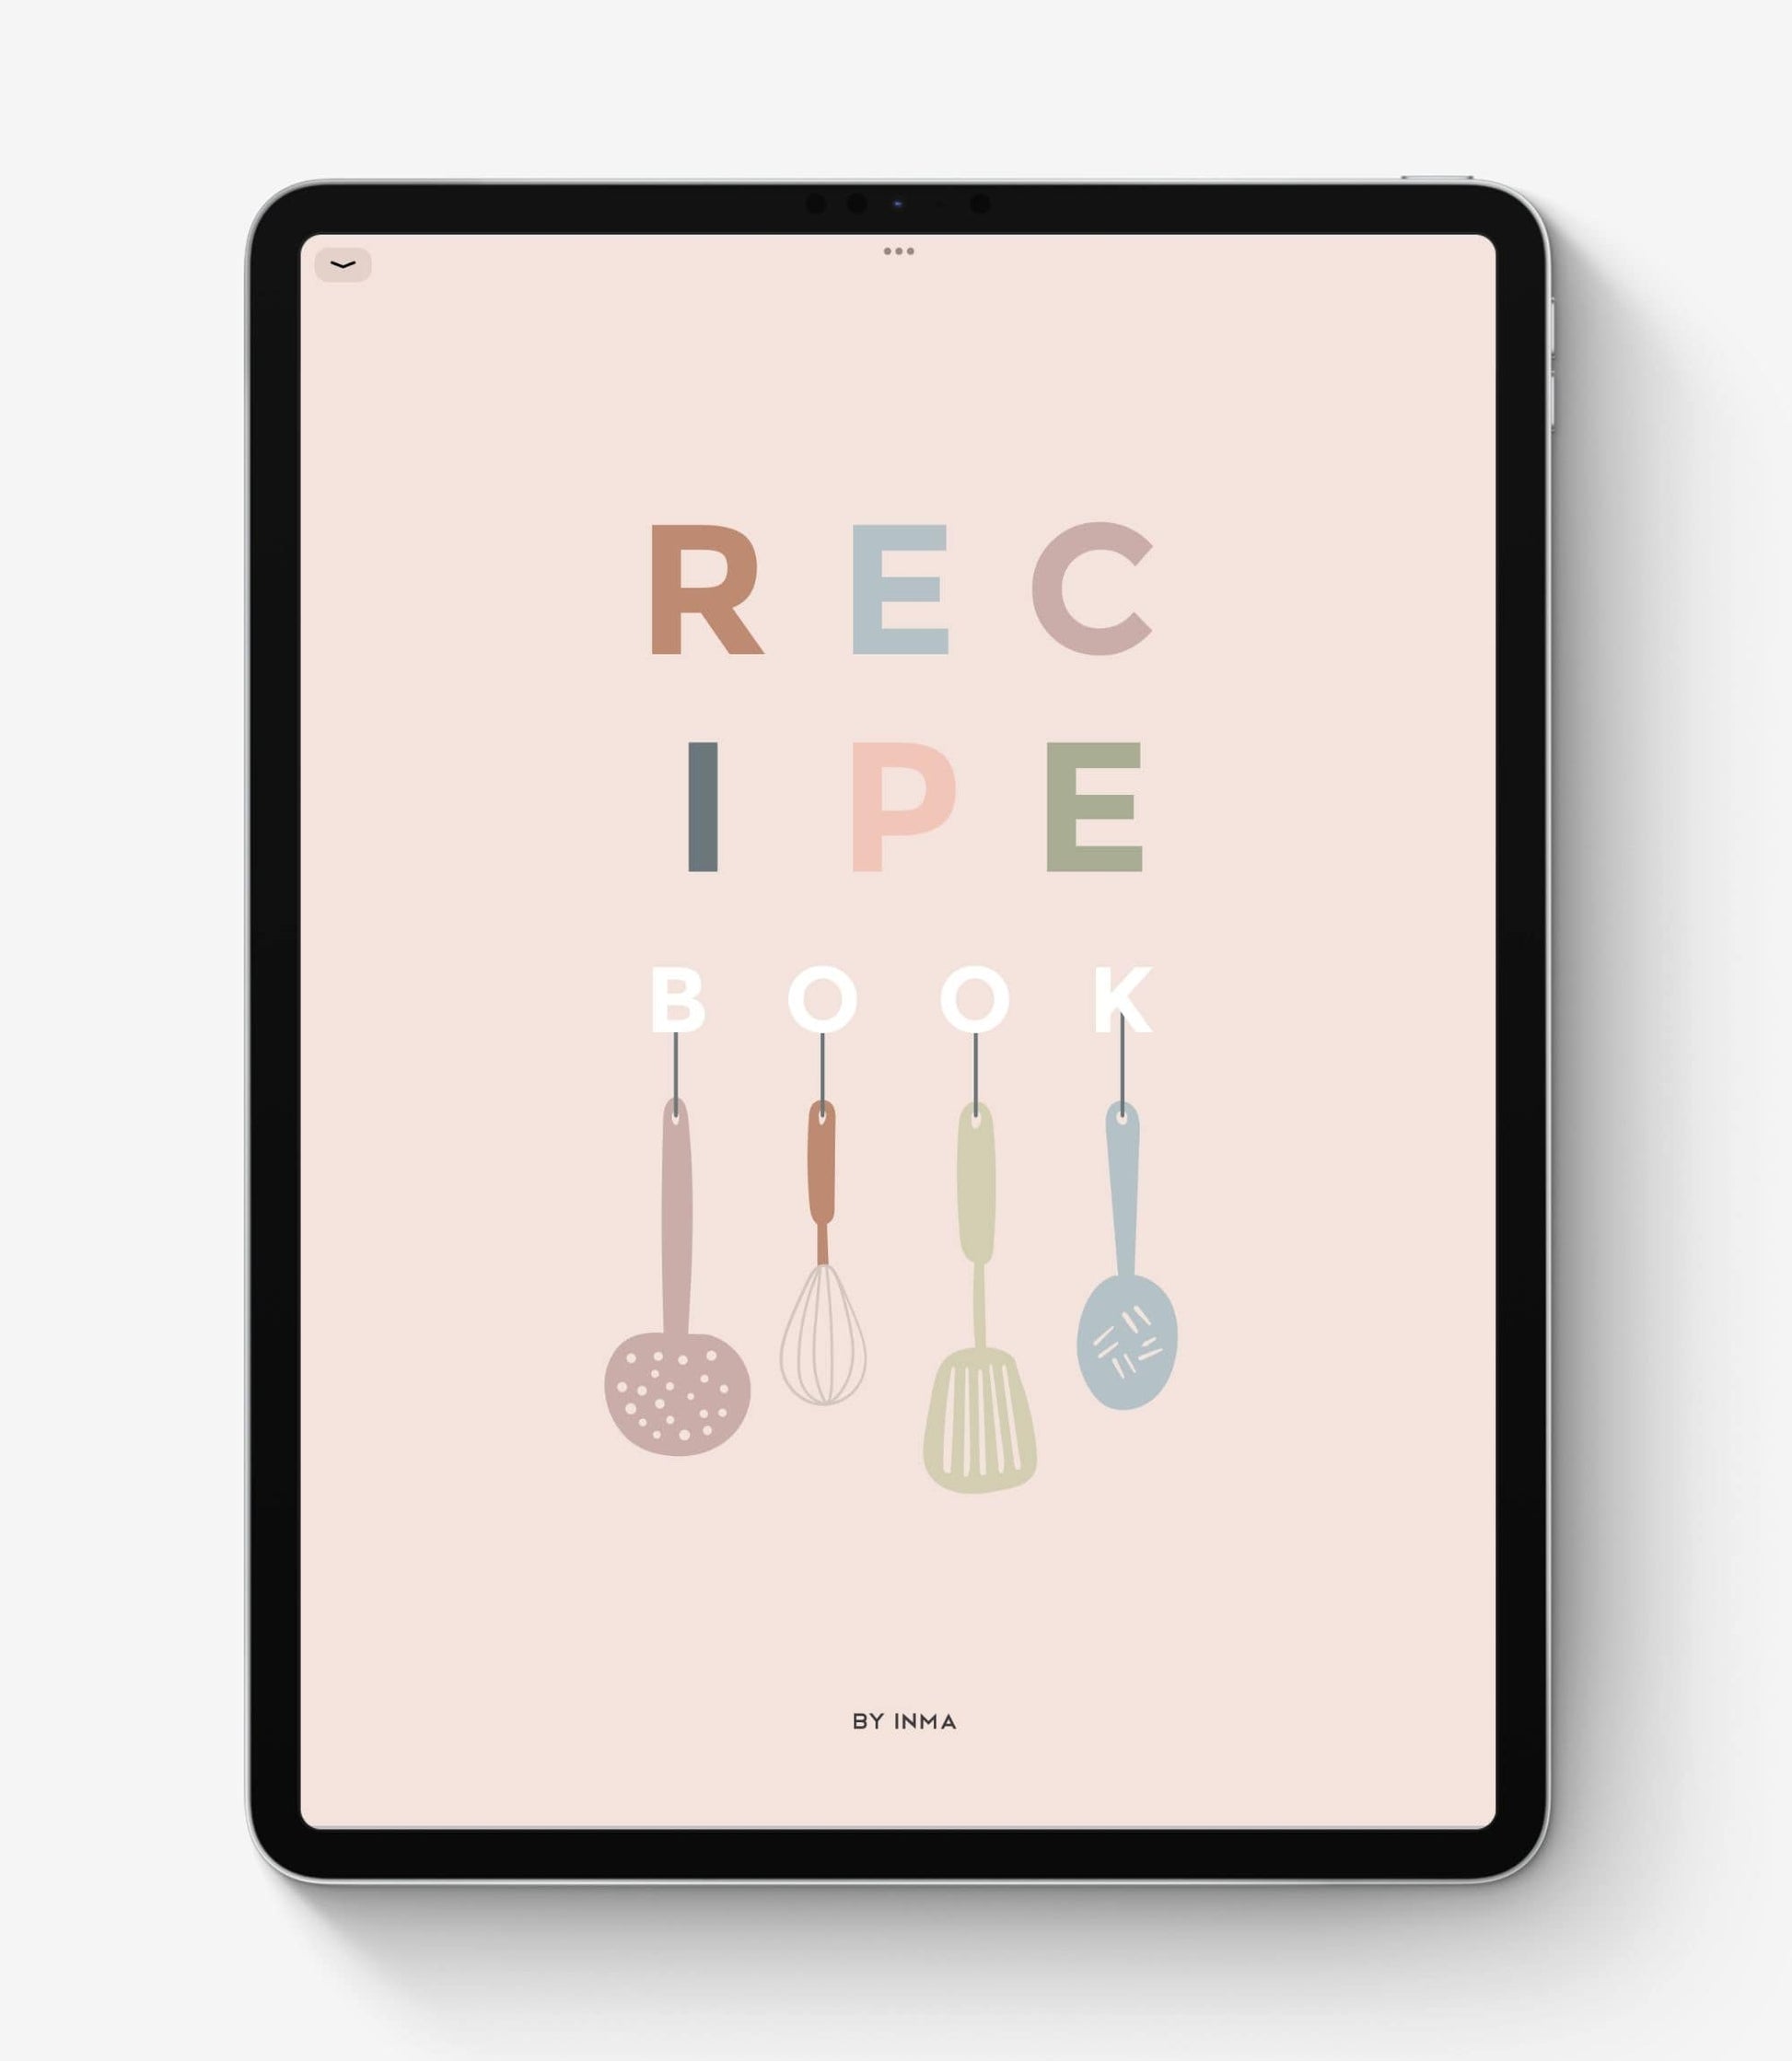 iPad with a digital recipe journal cover